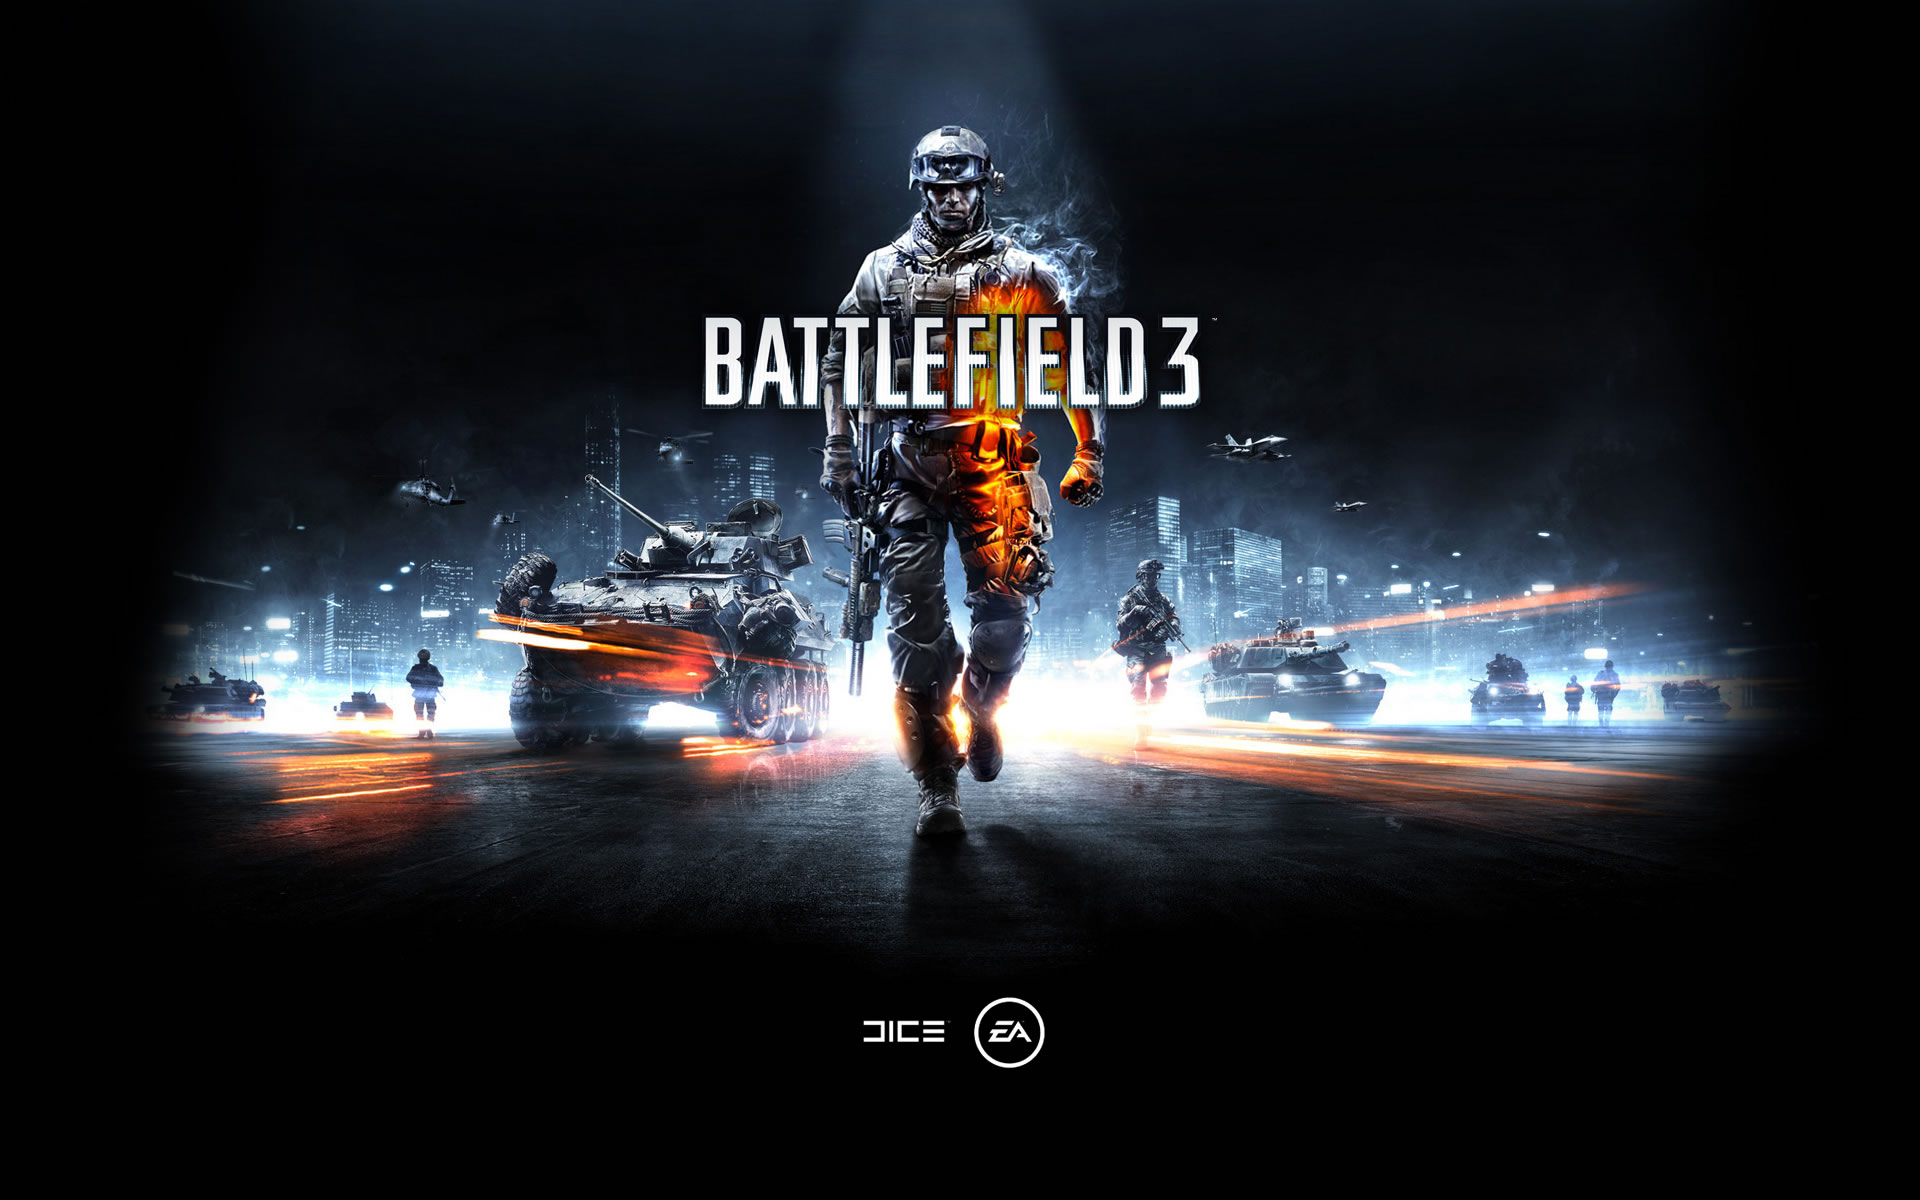 Battlefield 3’s Core Gameplay Designer Comments On Not Being Nominated In The Best Graphics Category